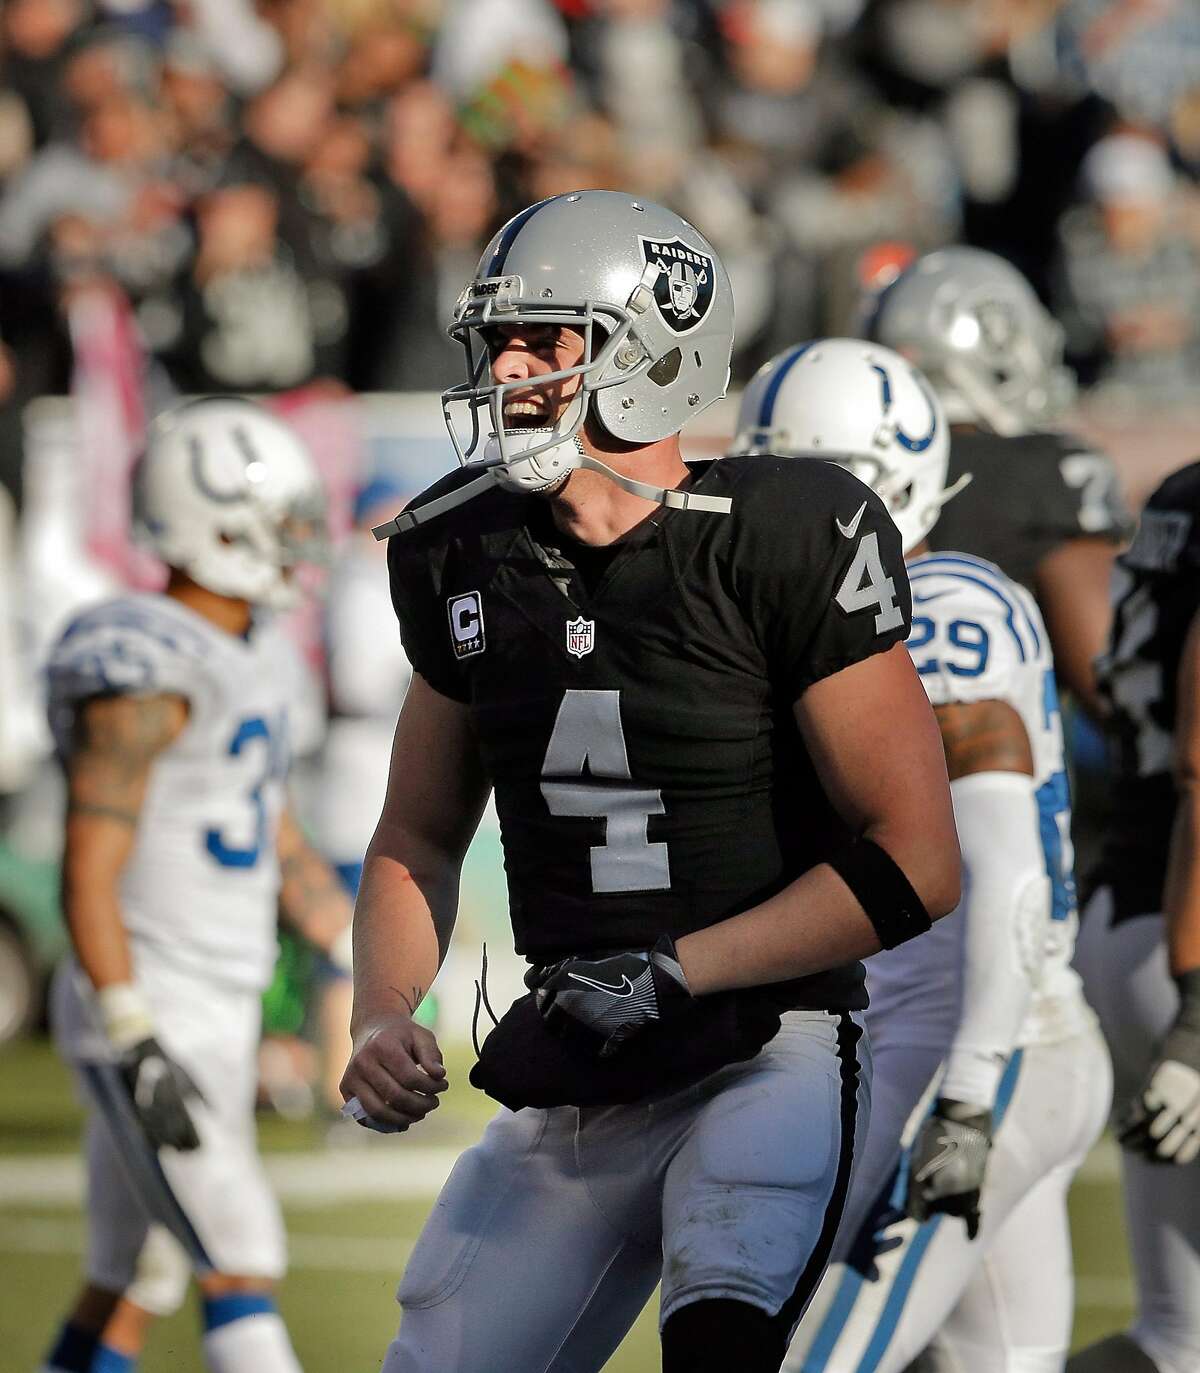 Derek Carr (4) celebrates a DeAndre Washington (33) touchdown in the third quarter as the Oakland Raiders played the Indianapolis Colts at the Oakland Coliseum in Oakland, Calif., on Saturday, December 24, 2016. The Raiders won the game 33-25, but lost quarterback Derek Carr to injury.